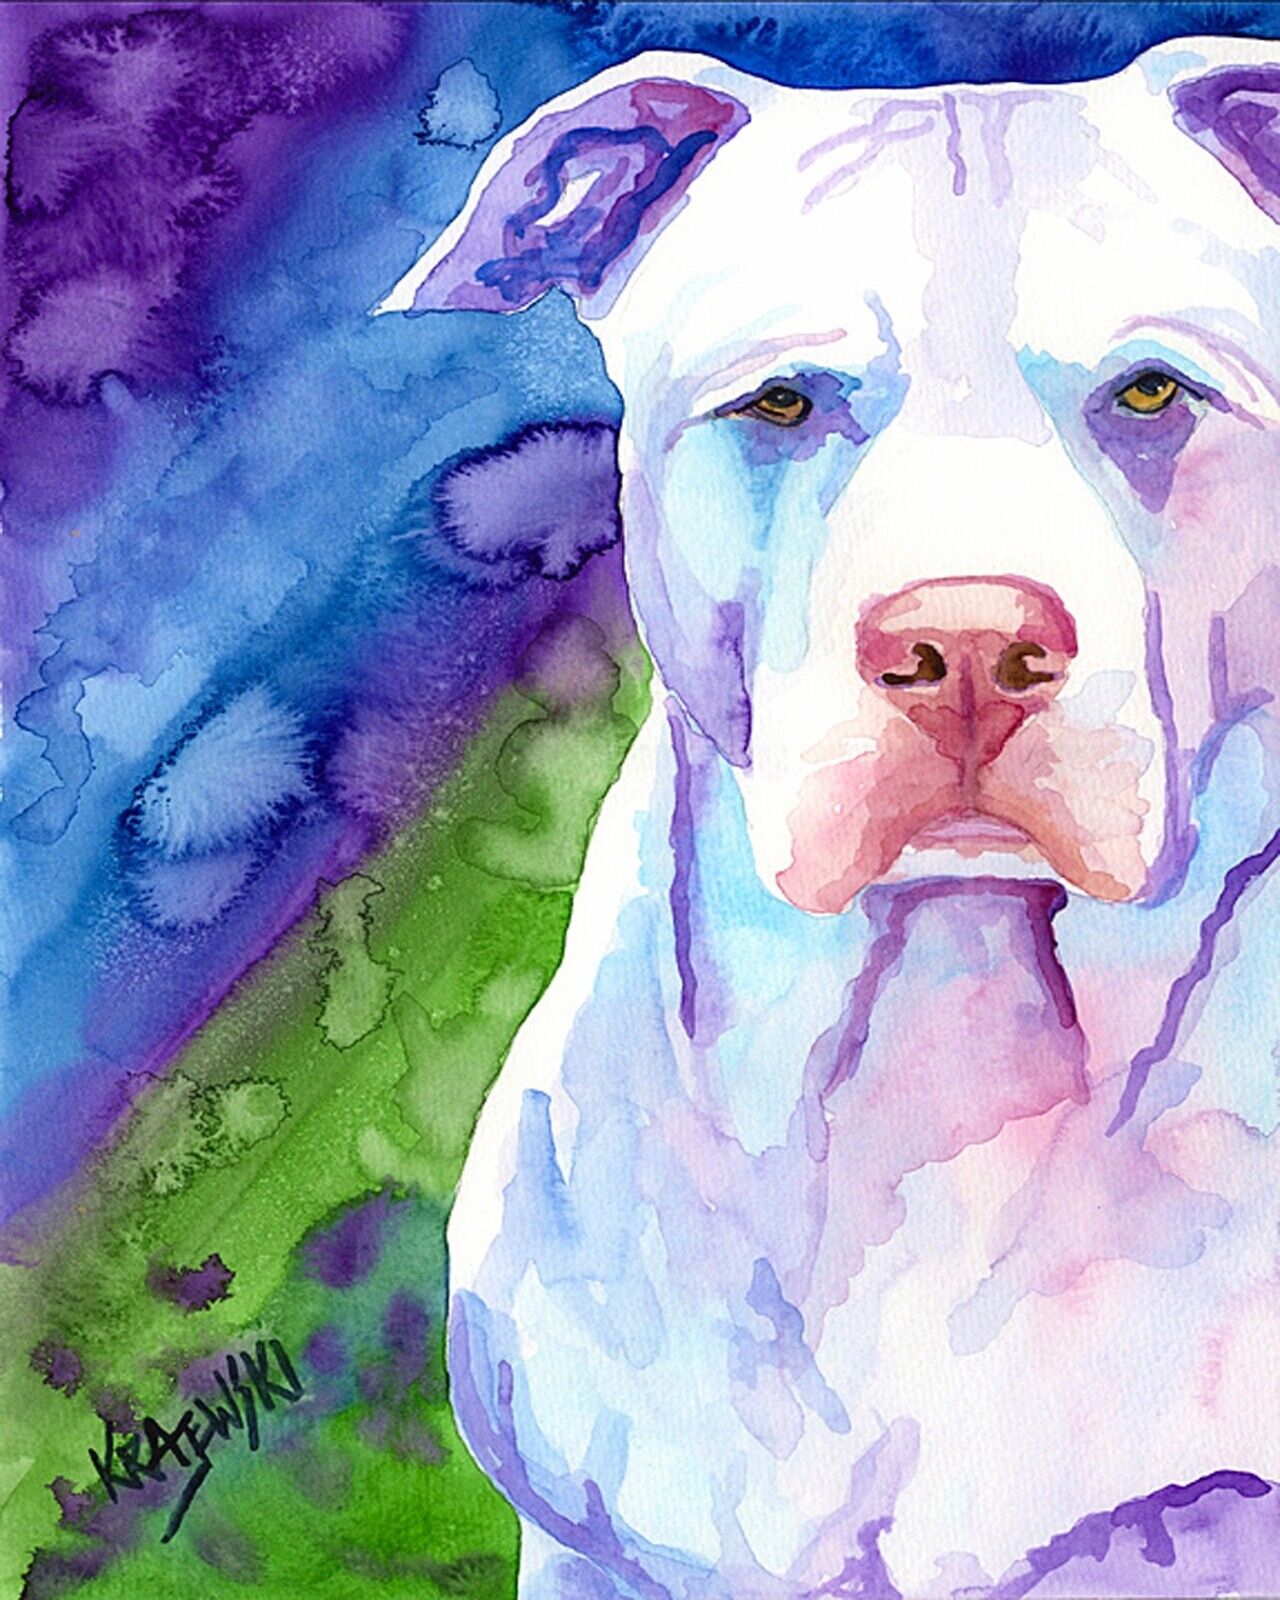 Pit Bull Art Print from Painting | Pitbull Gifts, Poster, Picture, Decor 8x10